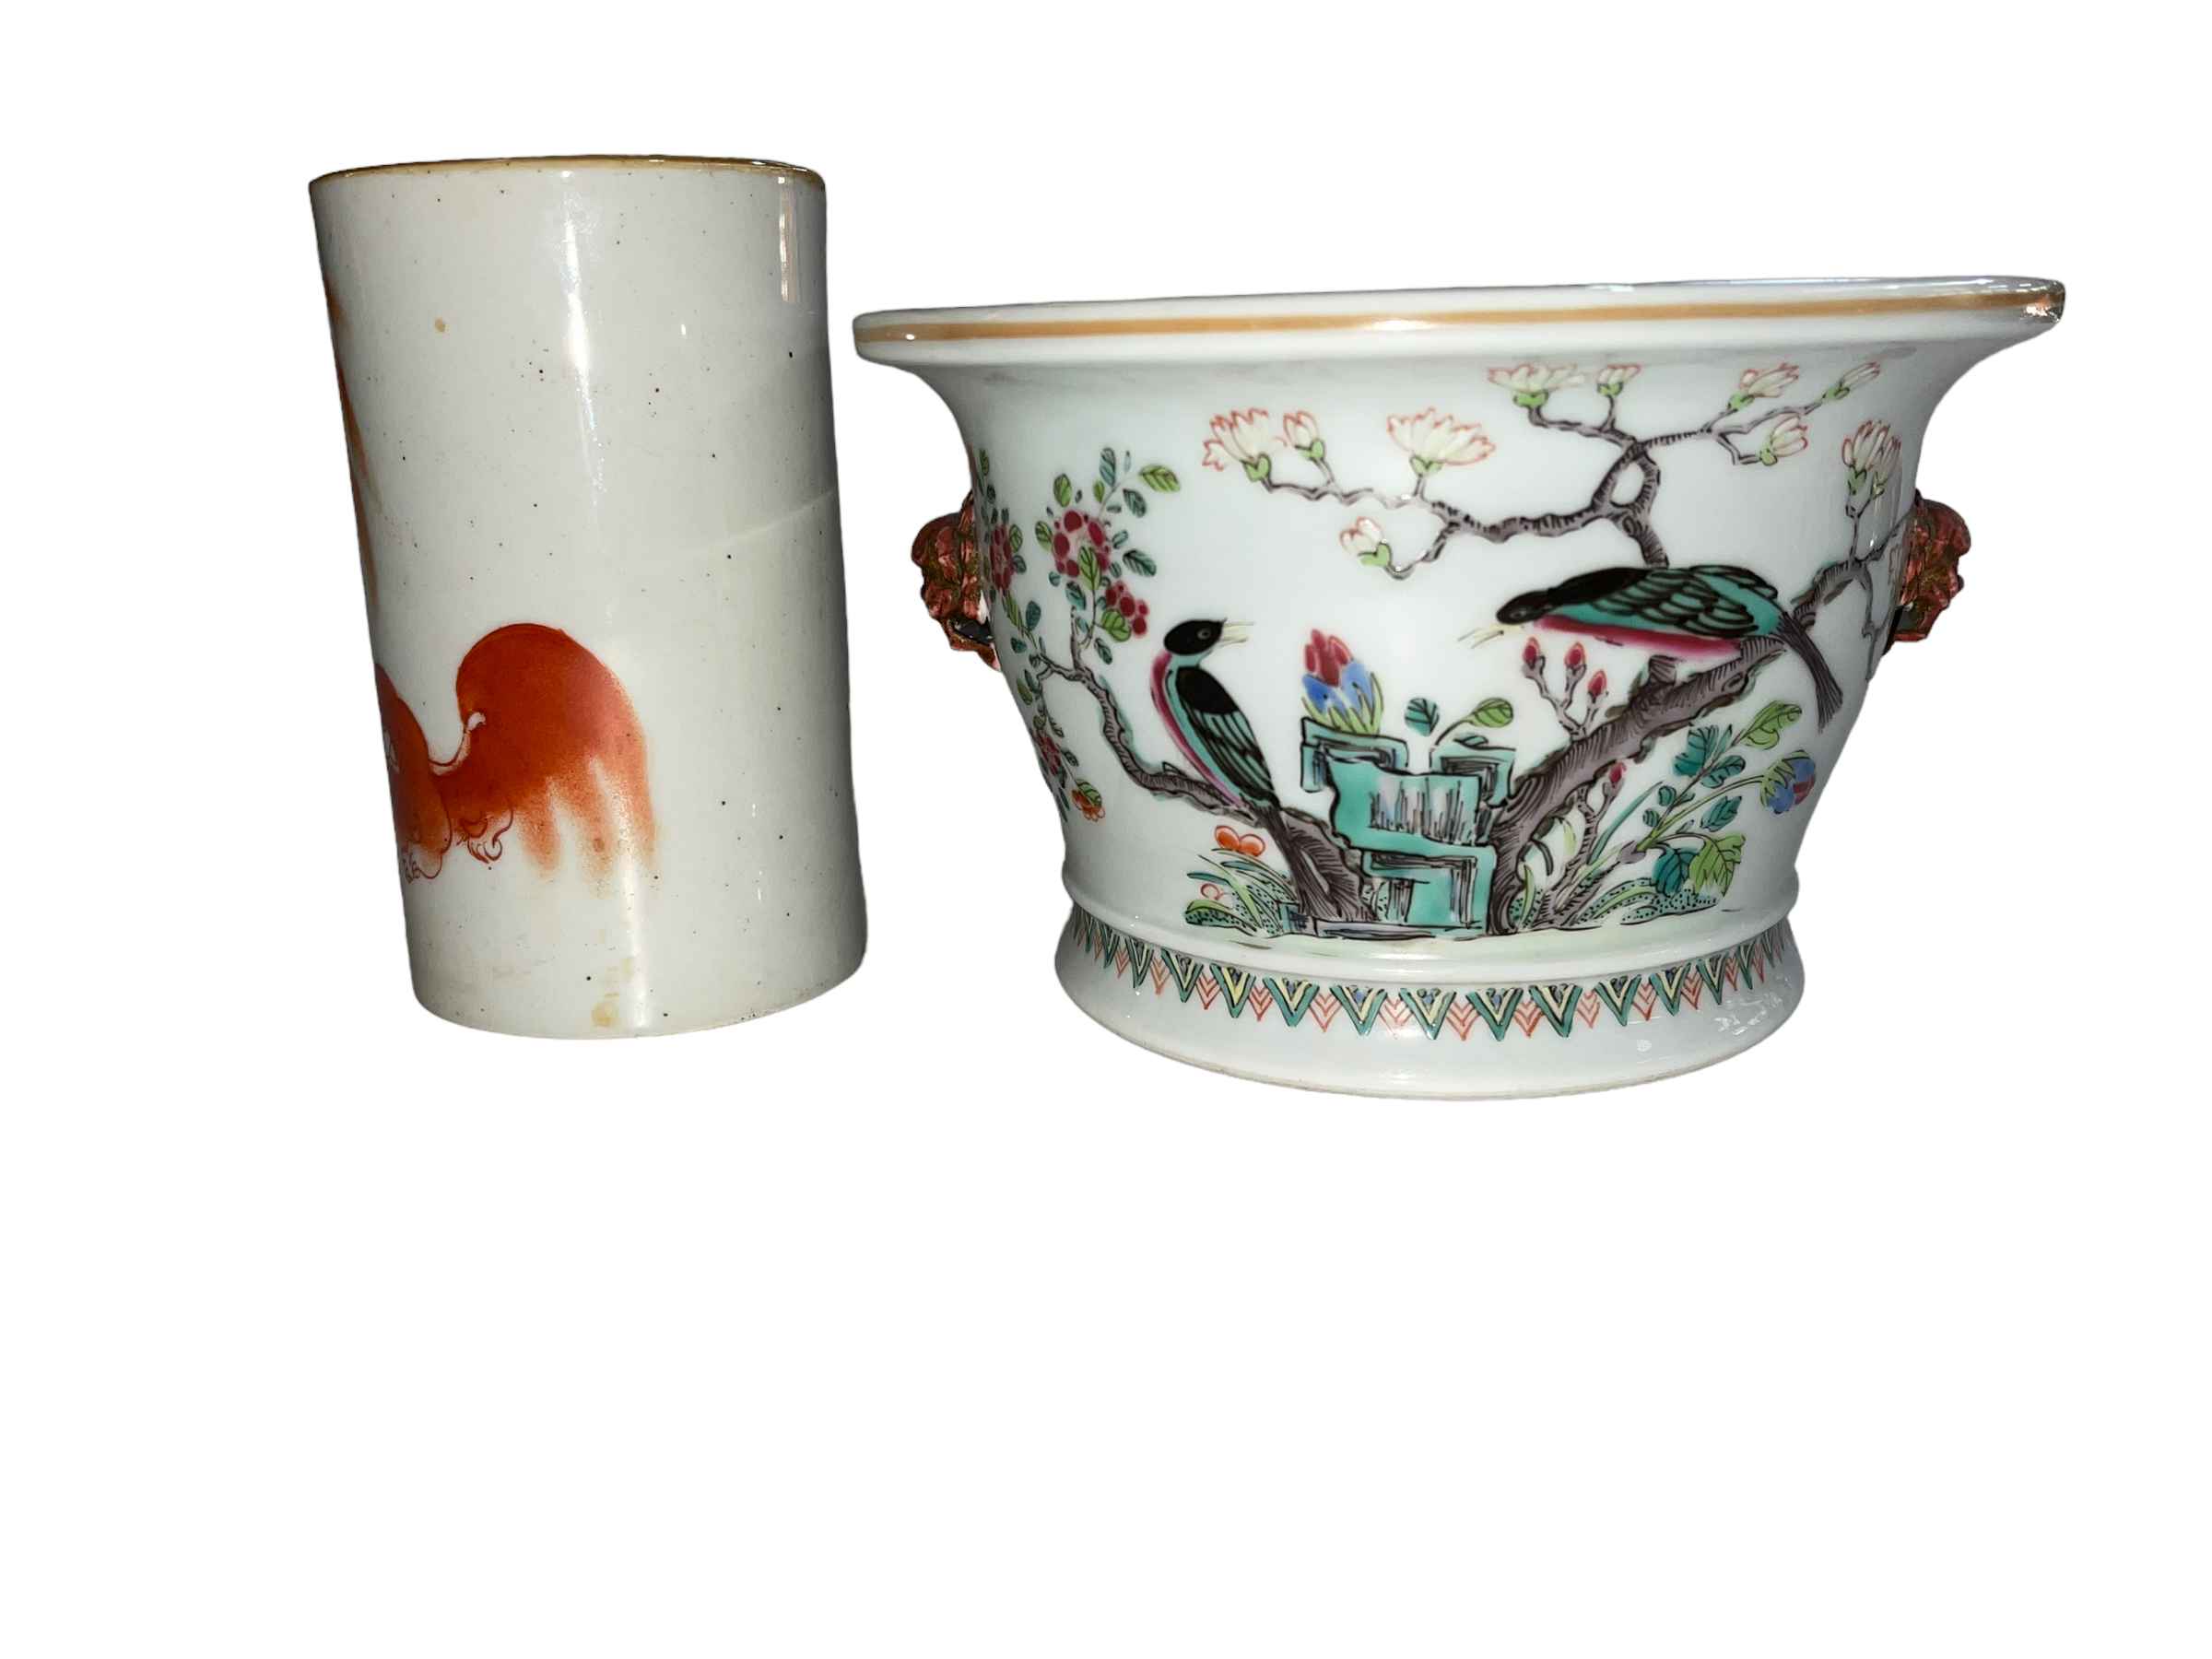 Chinese polychrome jardiniere with lion mask handles and fo dog brush pot (2). - Image 2 of 3